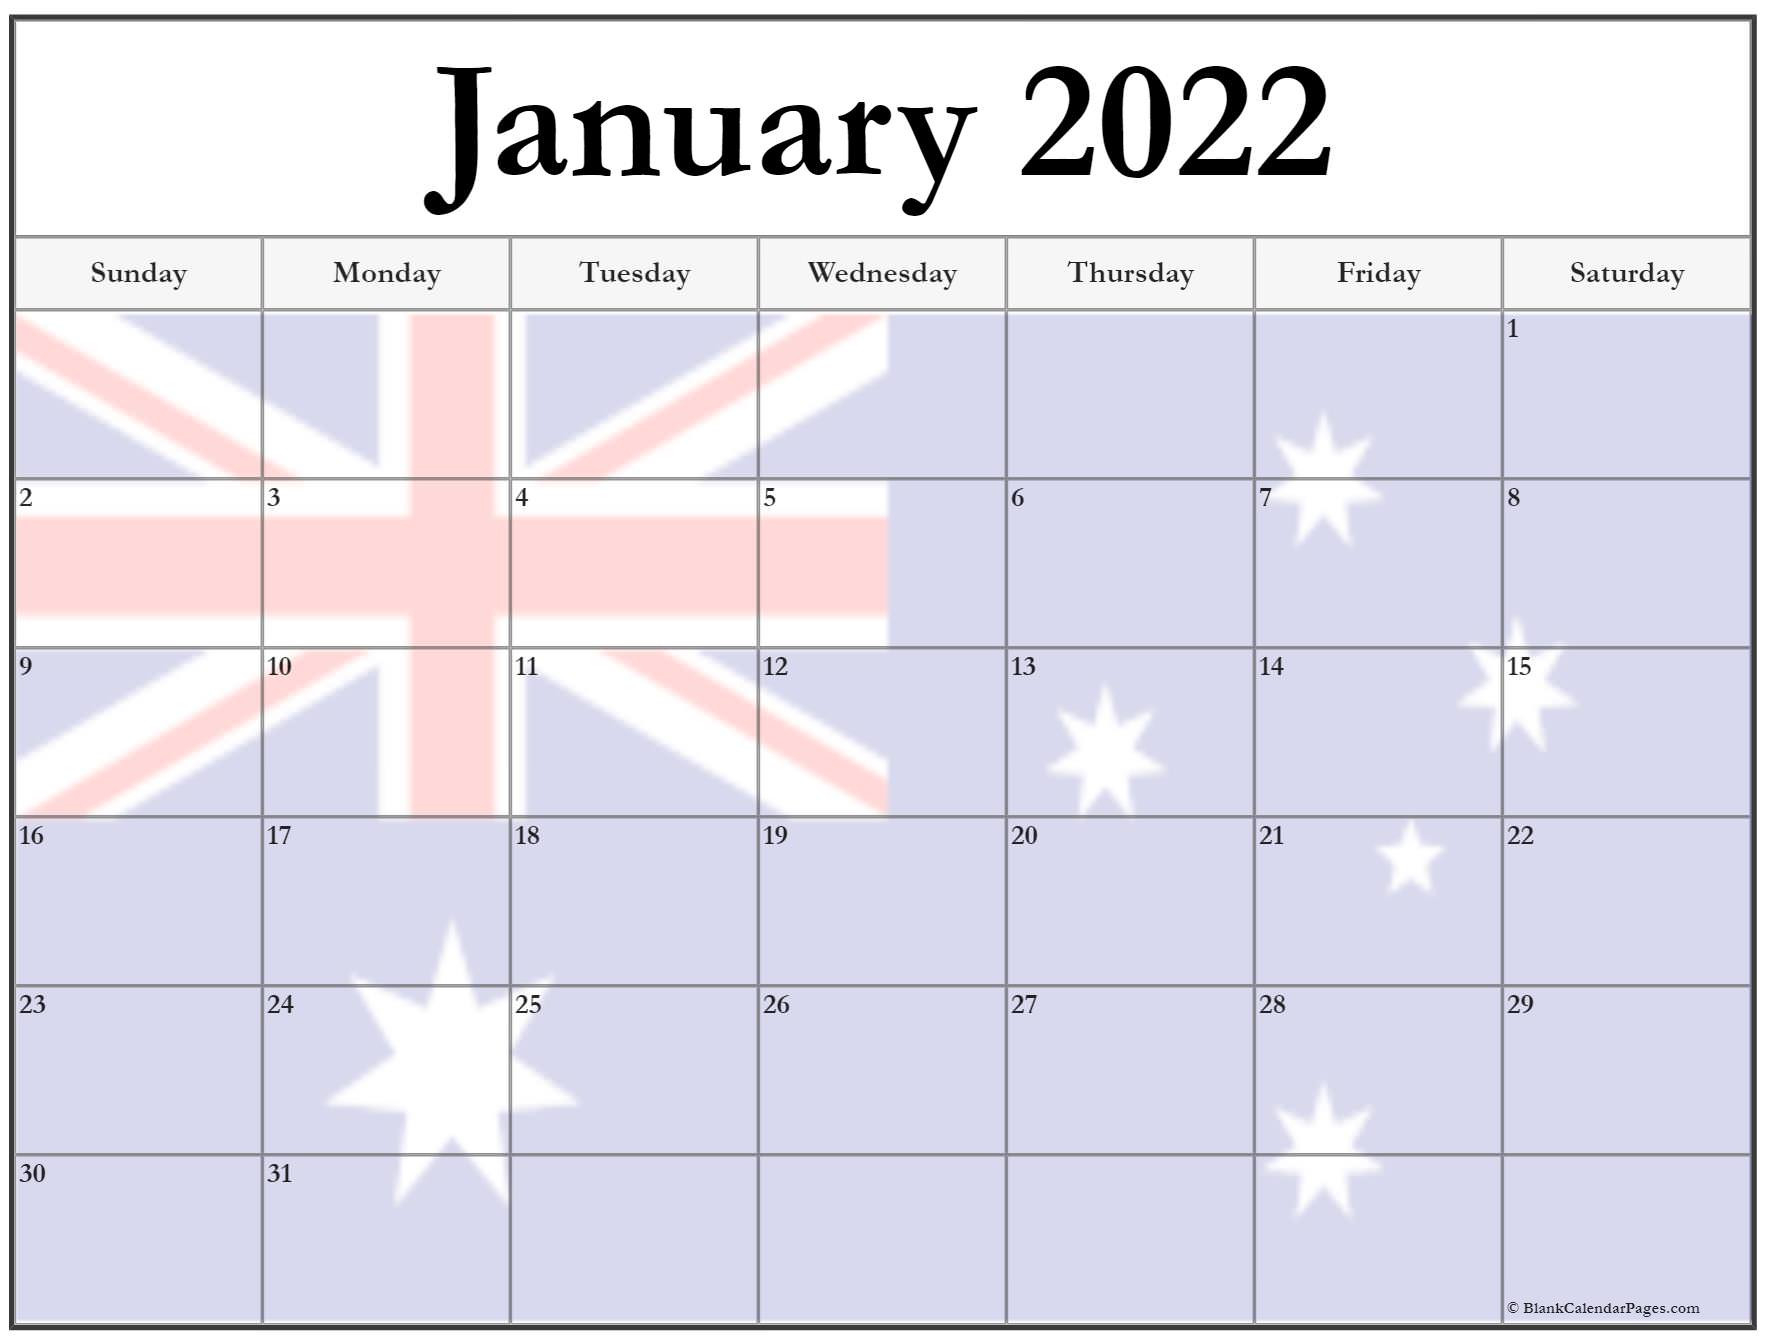 Collection Of January 2022 Photo Calendars With Image Filters.-Free Printable Calendar 2022 Australia